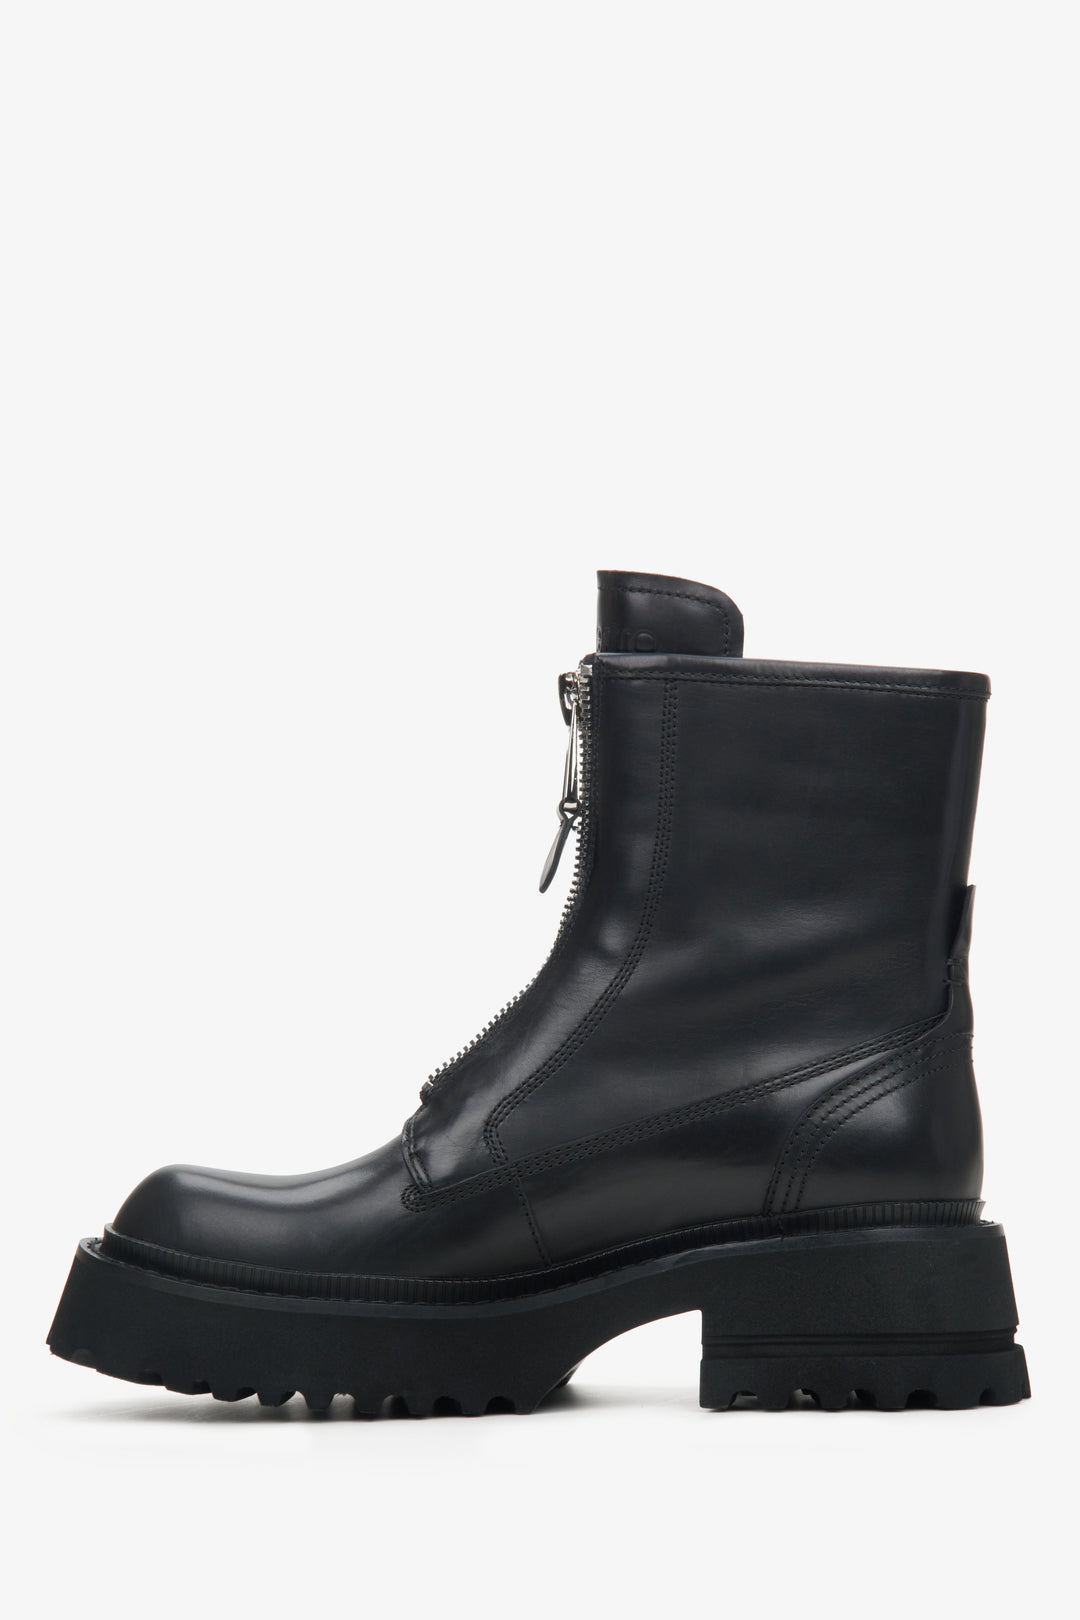 Women's boots by Estro with a silver zipper made of genuine leather - shoe profile.